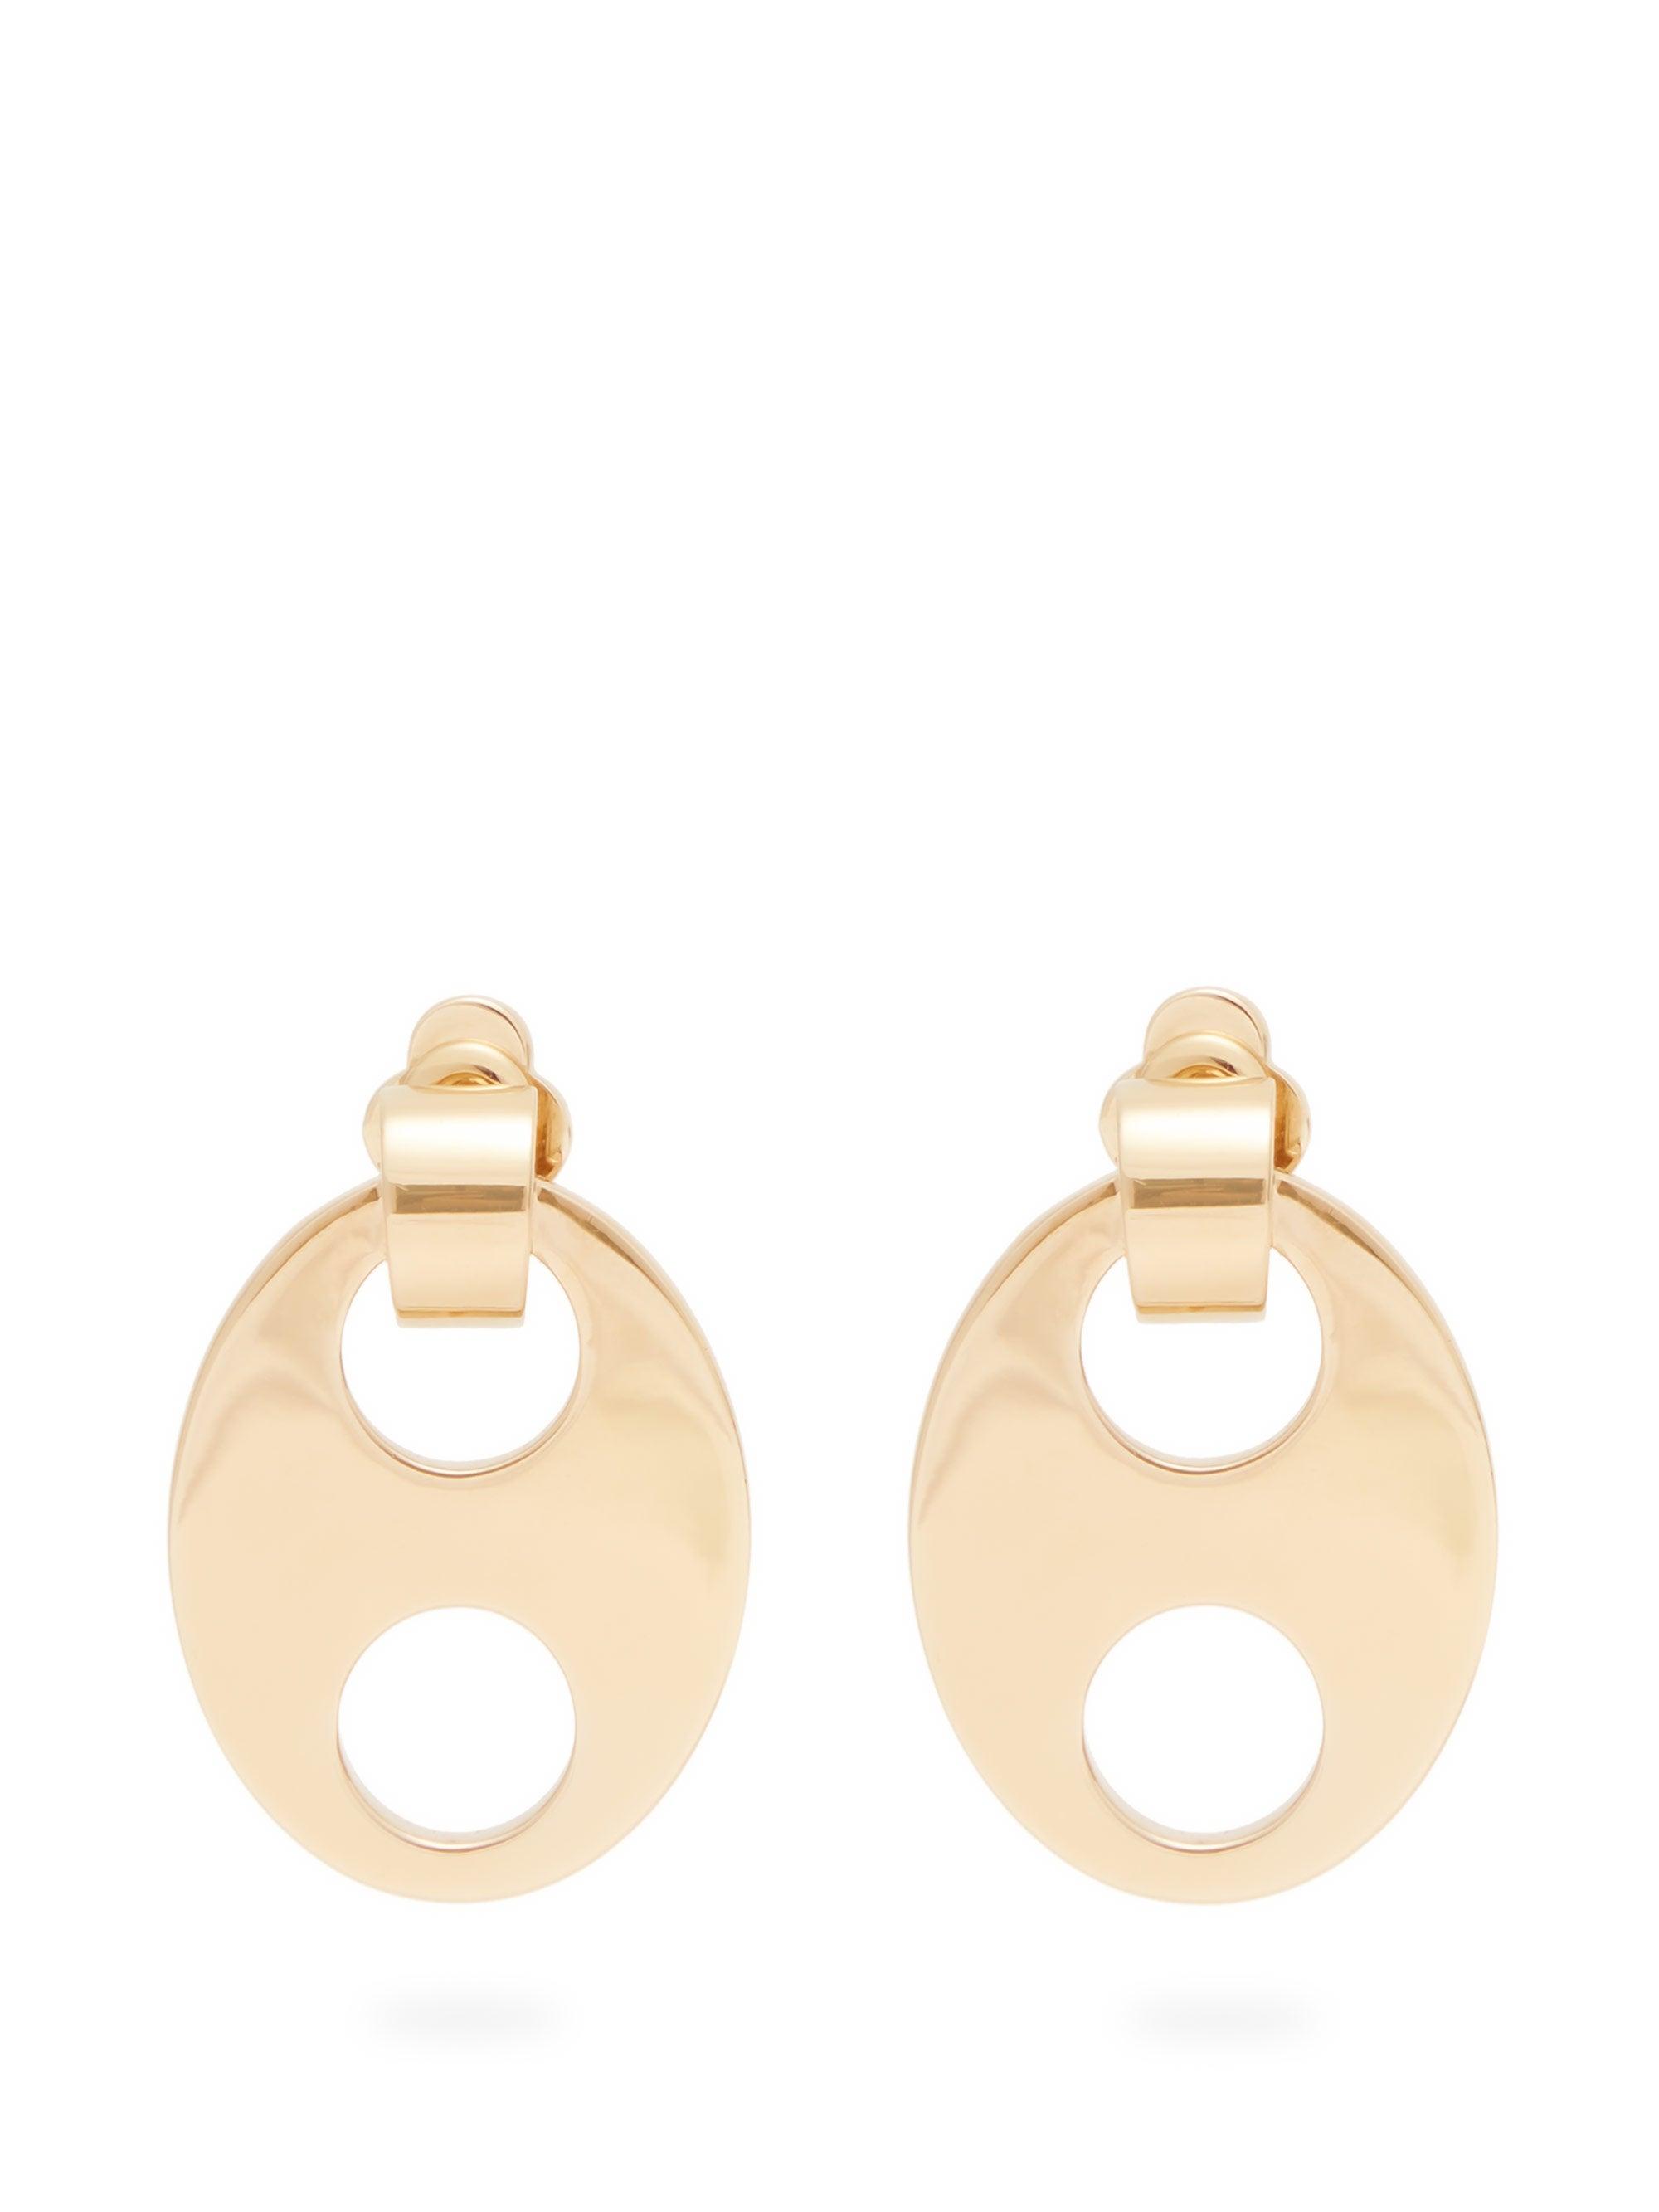 Paco Rabanne Eight Cut-out Earrings in Gold (Metallic) - Lyst